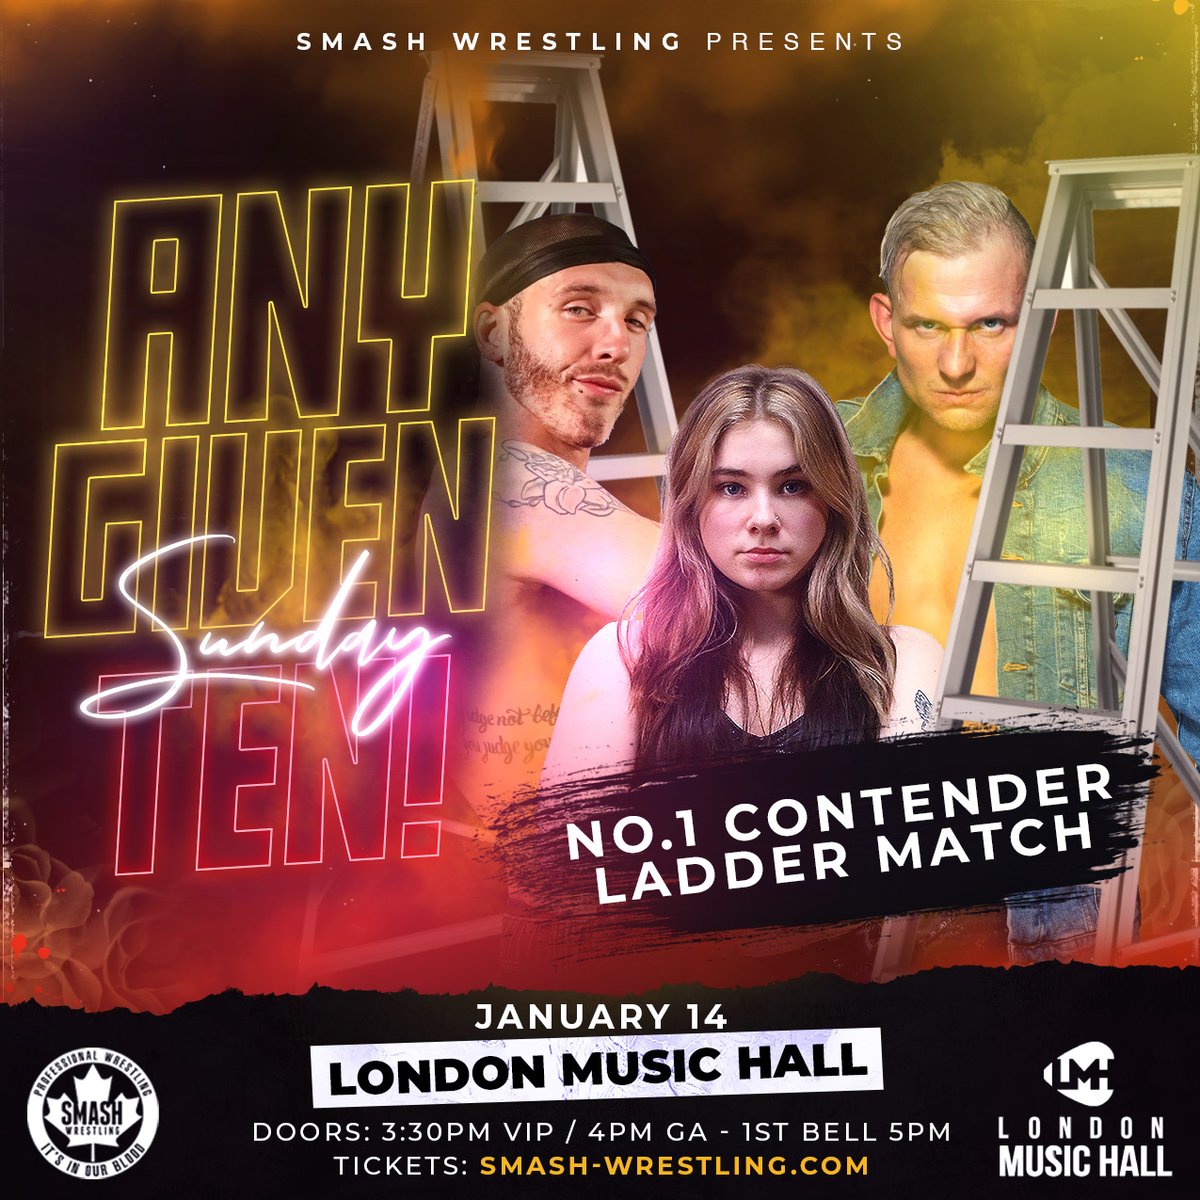 Let's drop a third name for the No. 1 Contender Ladder Match at Any Given Sunday! Haley Dylan will battle it out with Aiden Prince, @masonwrestling and.. ??? 🤔 Catch #AGS10 at London Music Hall on Sun. Jan. 14, 2024. 🎟️ TIX ➡️ smash-wrestling.com